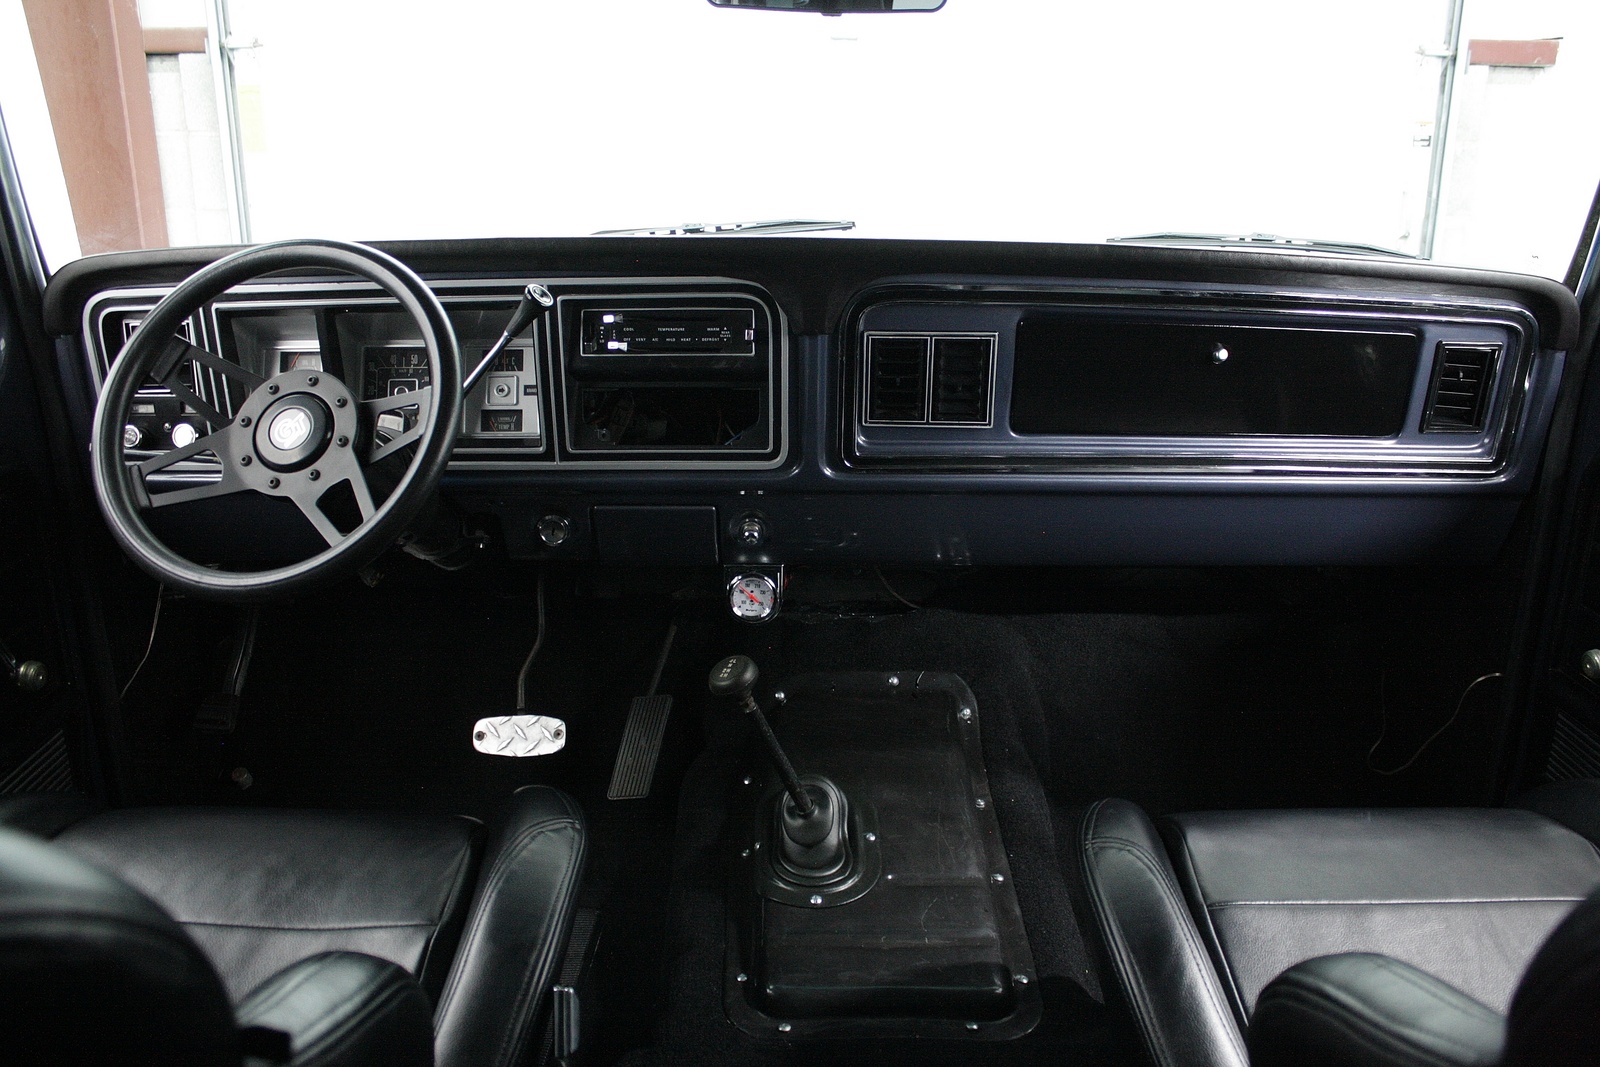 1979 Ford bronco upholstery